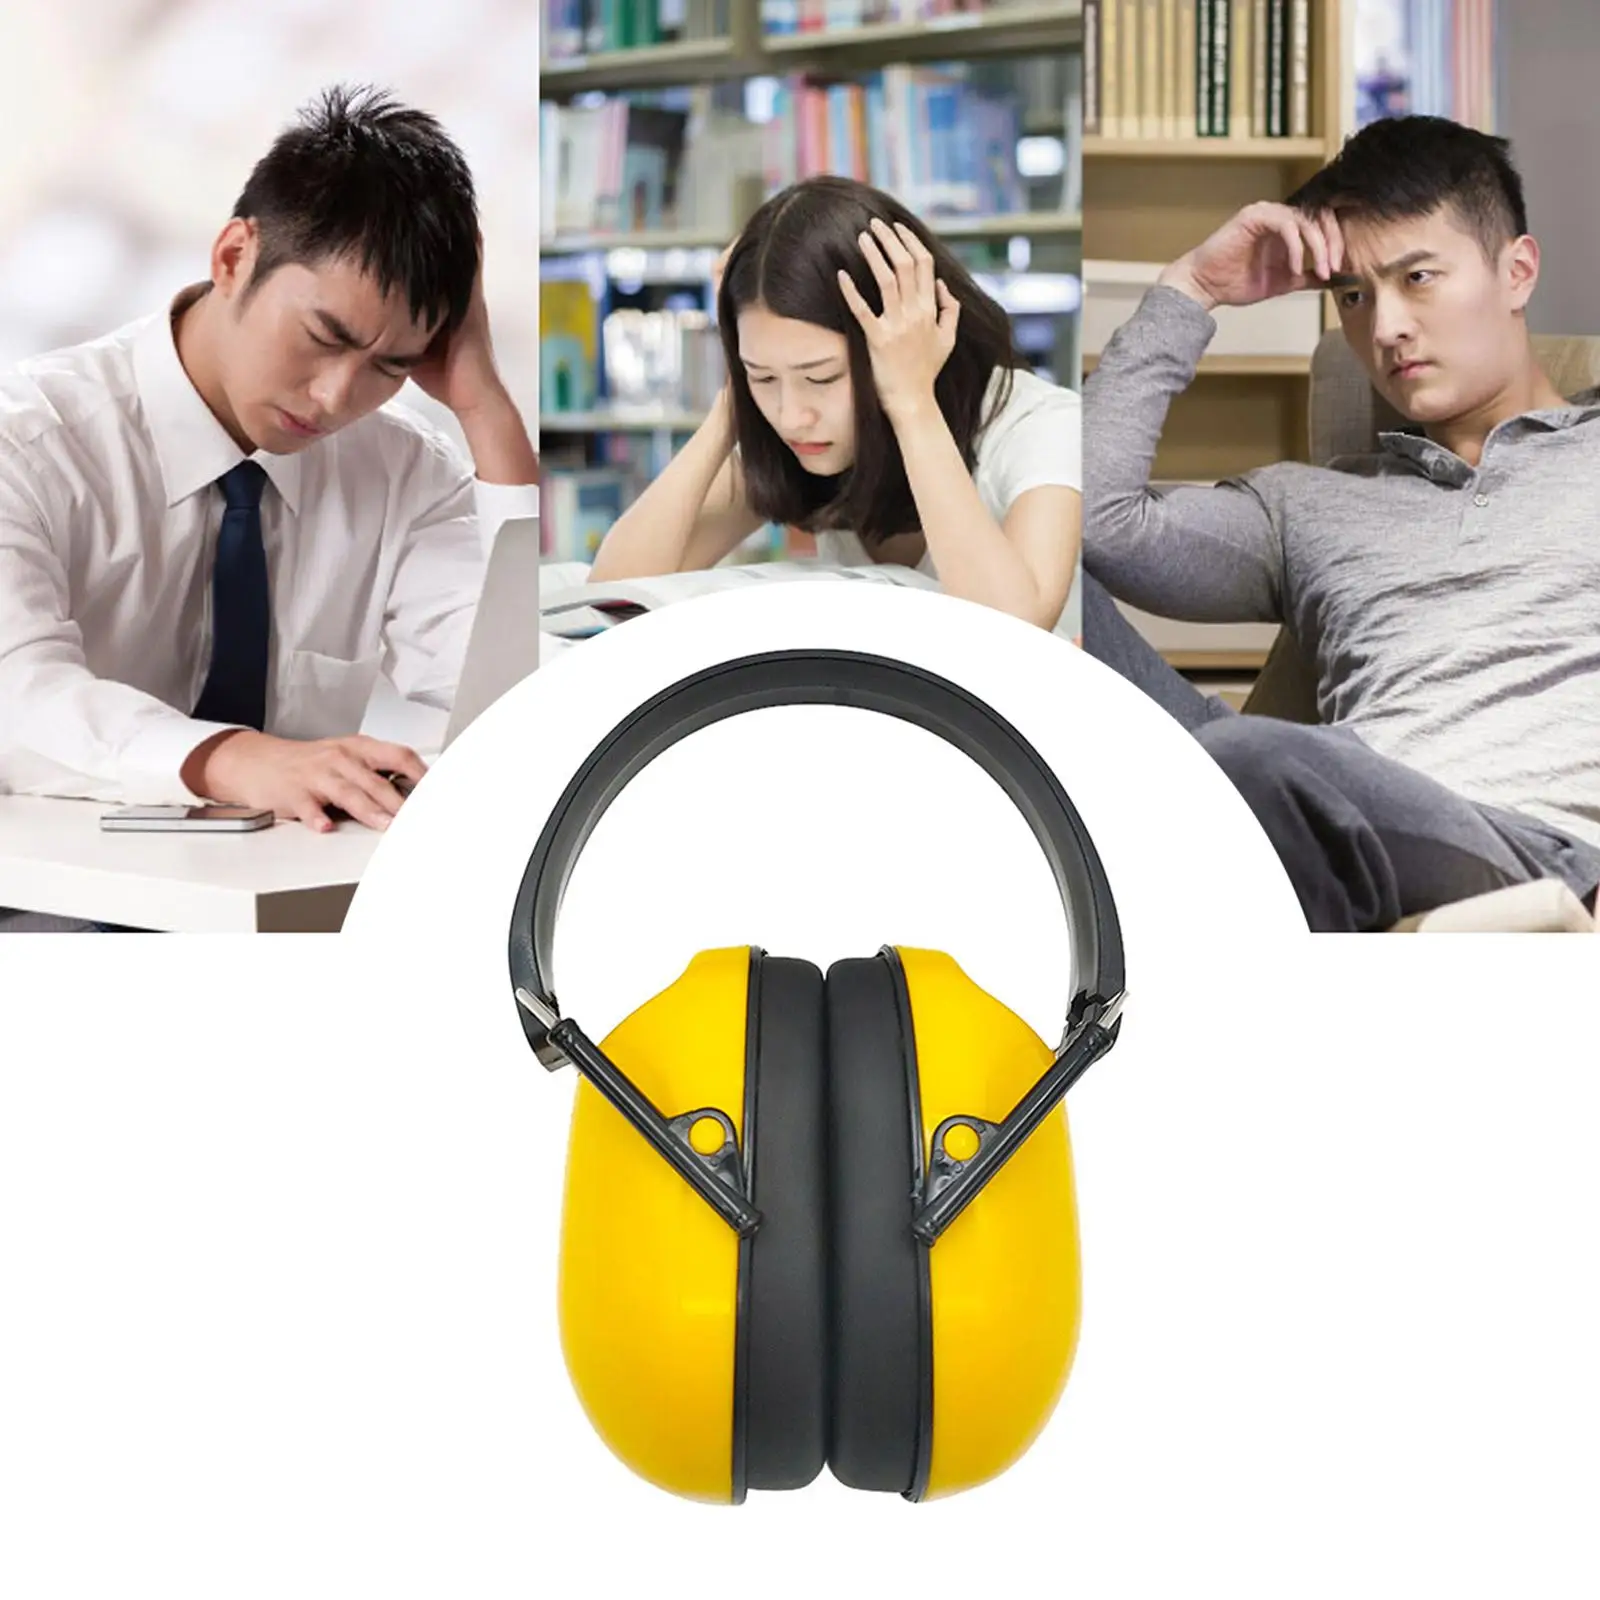 Kids Ear Muffs Hearing Protection Foldable Earplugs Headband Ear Defenders Ear Protection for Fireworks Airports Sports Events